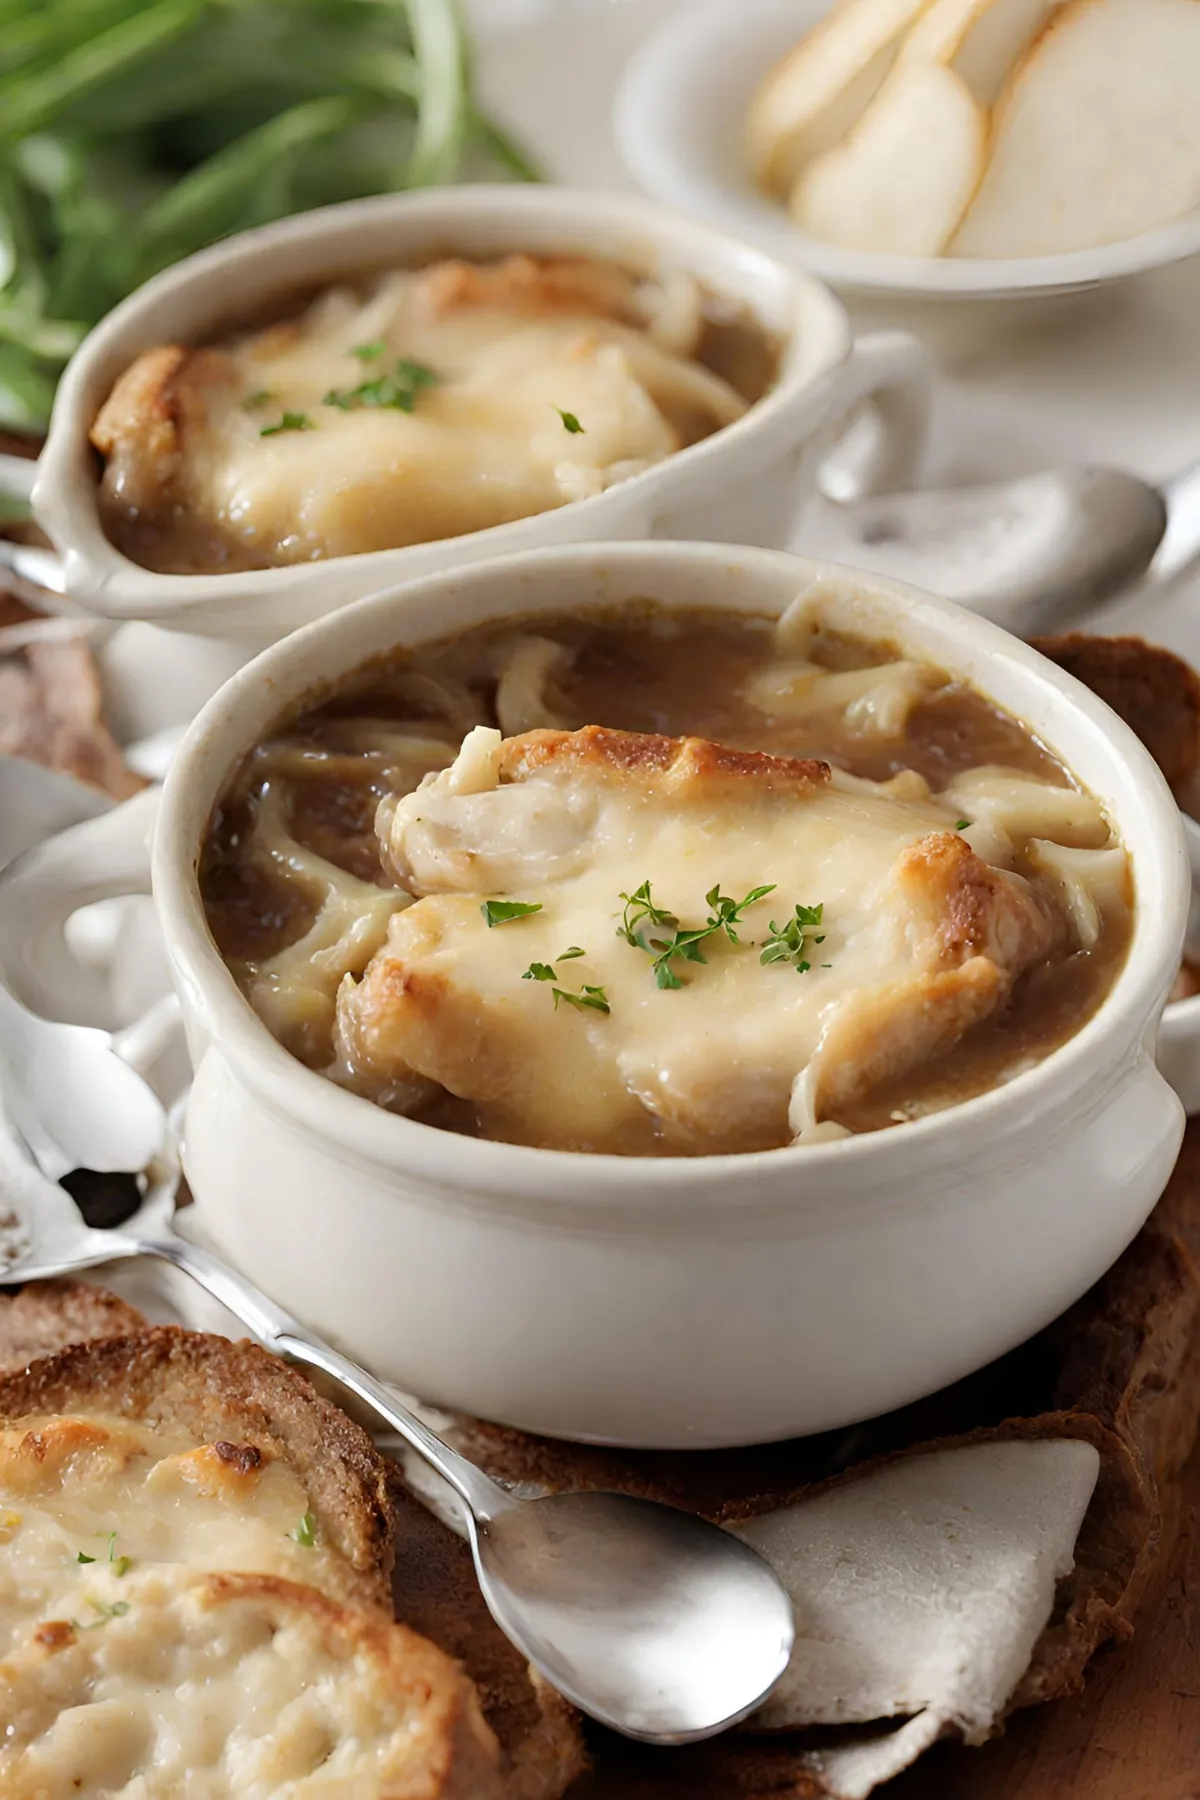 Combining Chicken with French Onion Soup